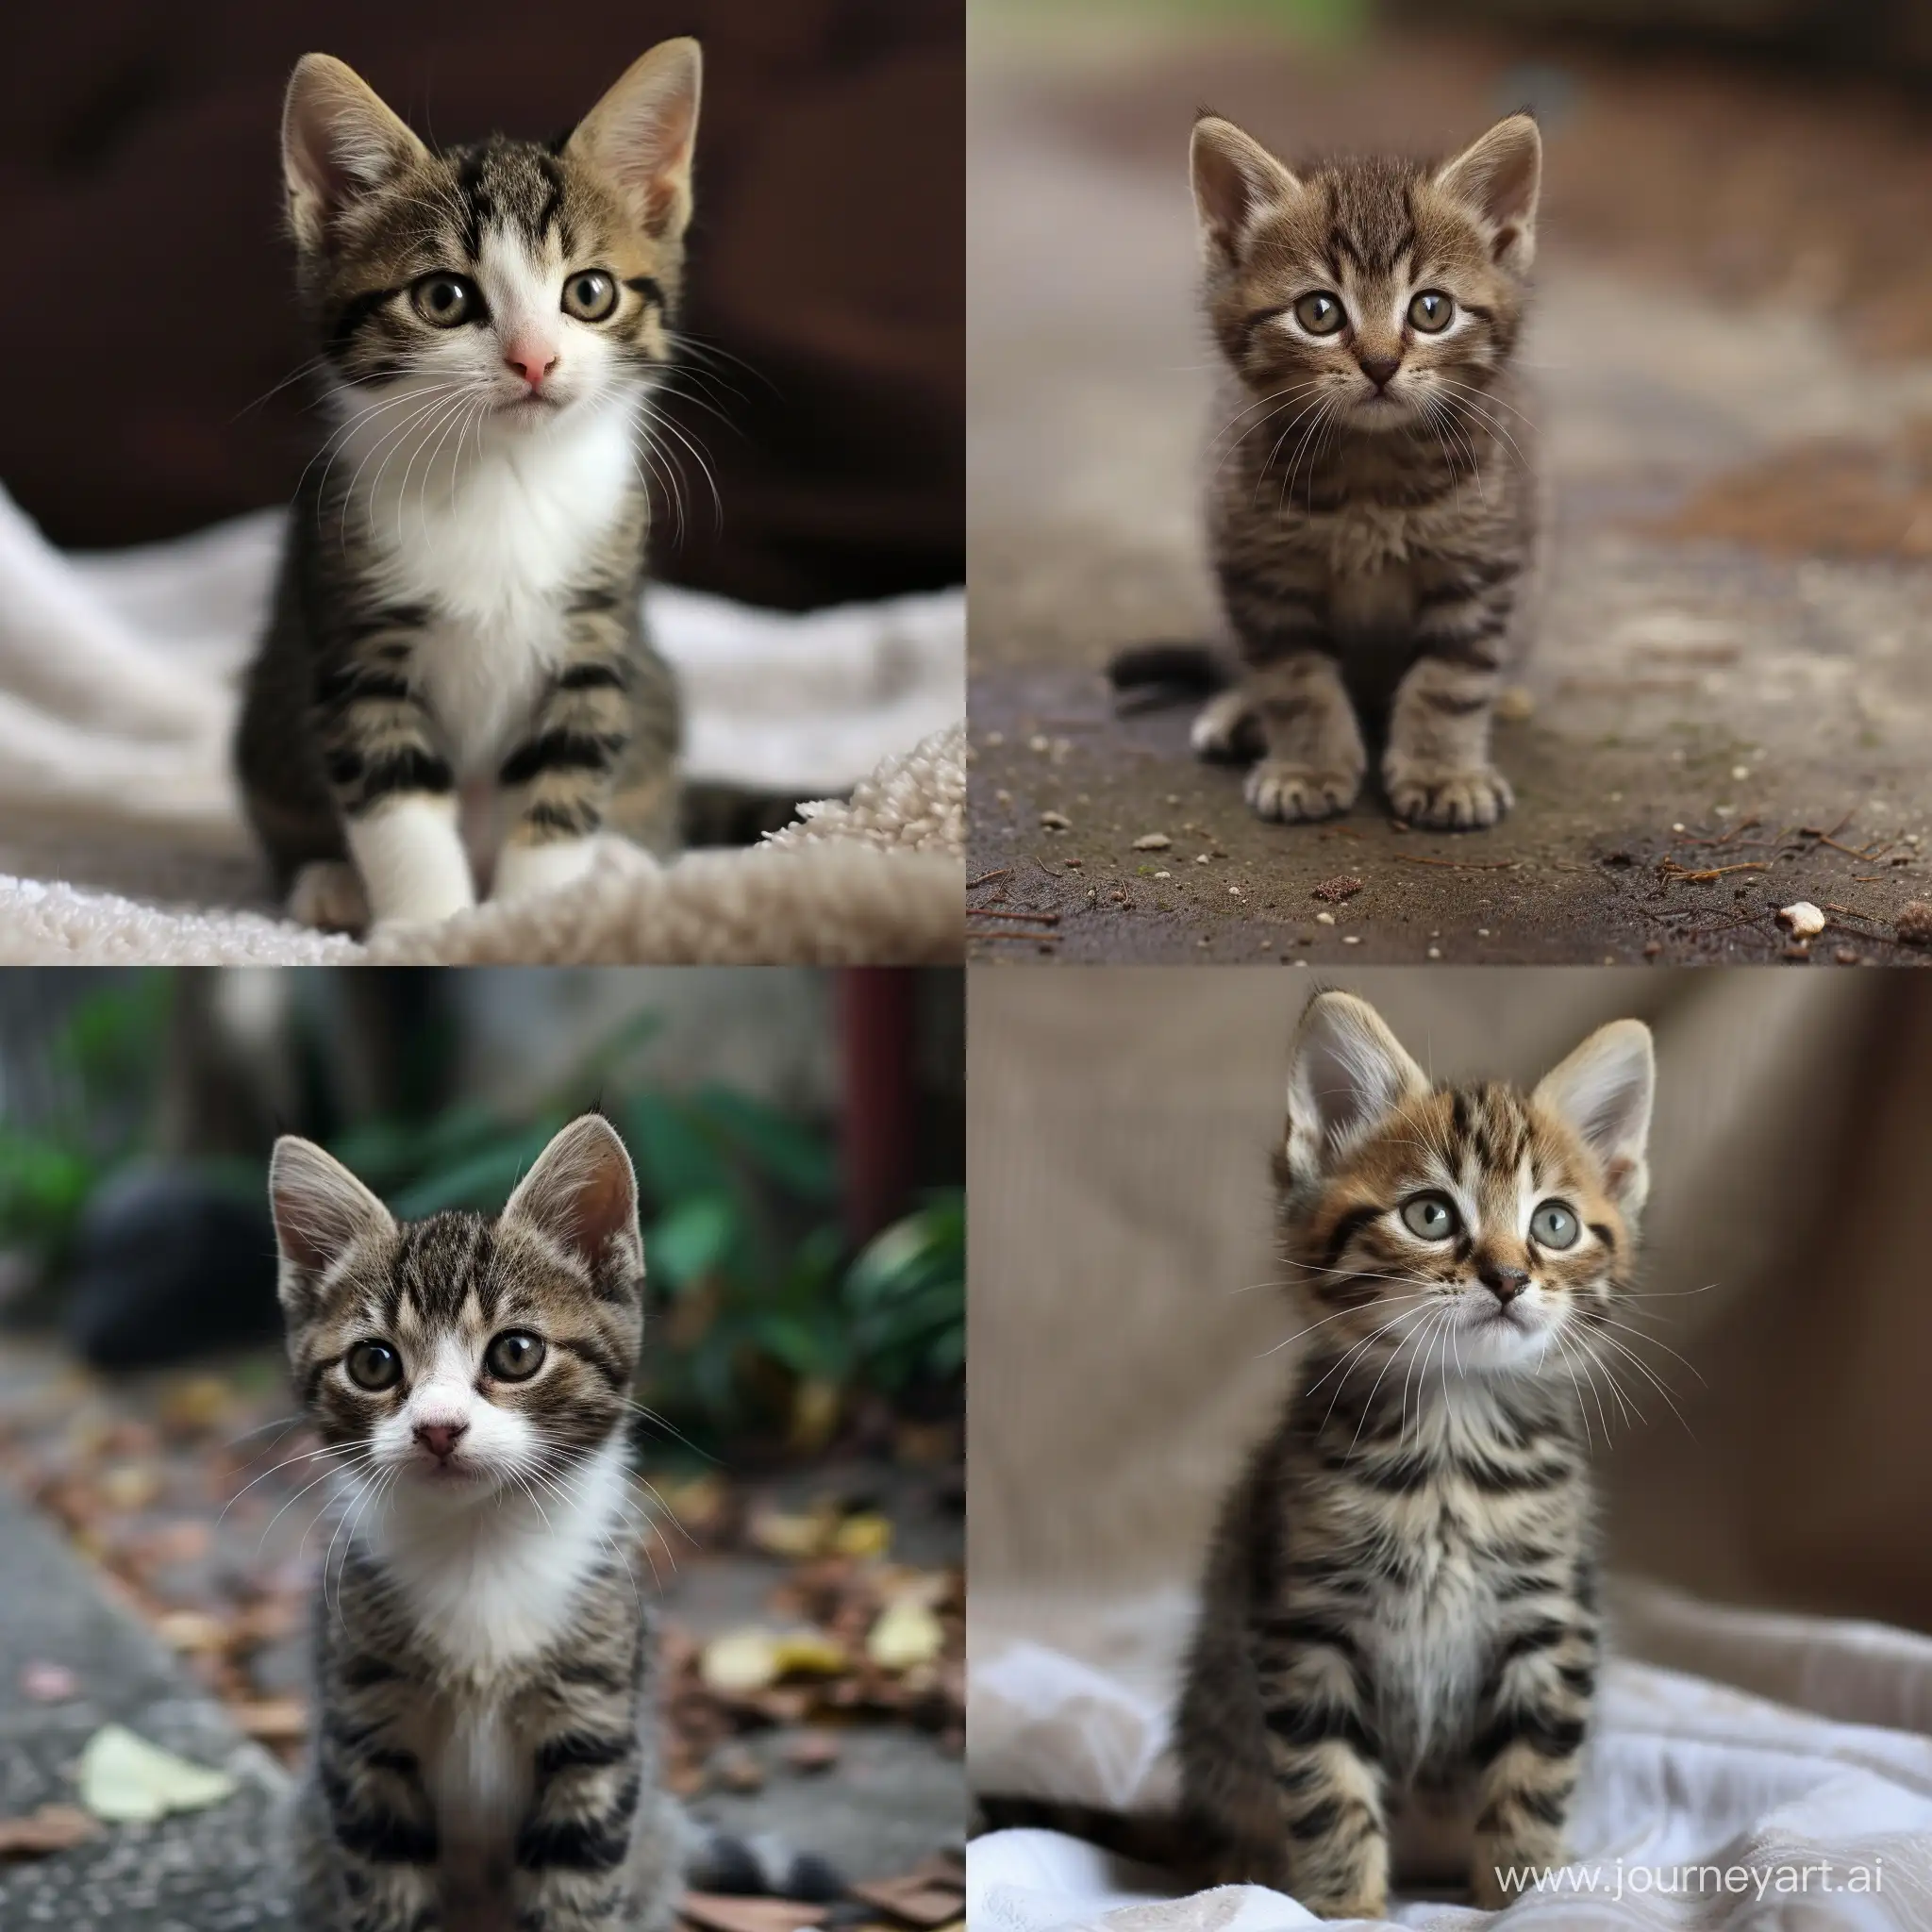 Adorable-Small-Cat-in-Playful-Poses